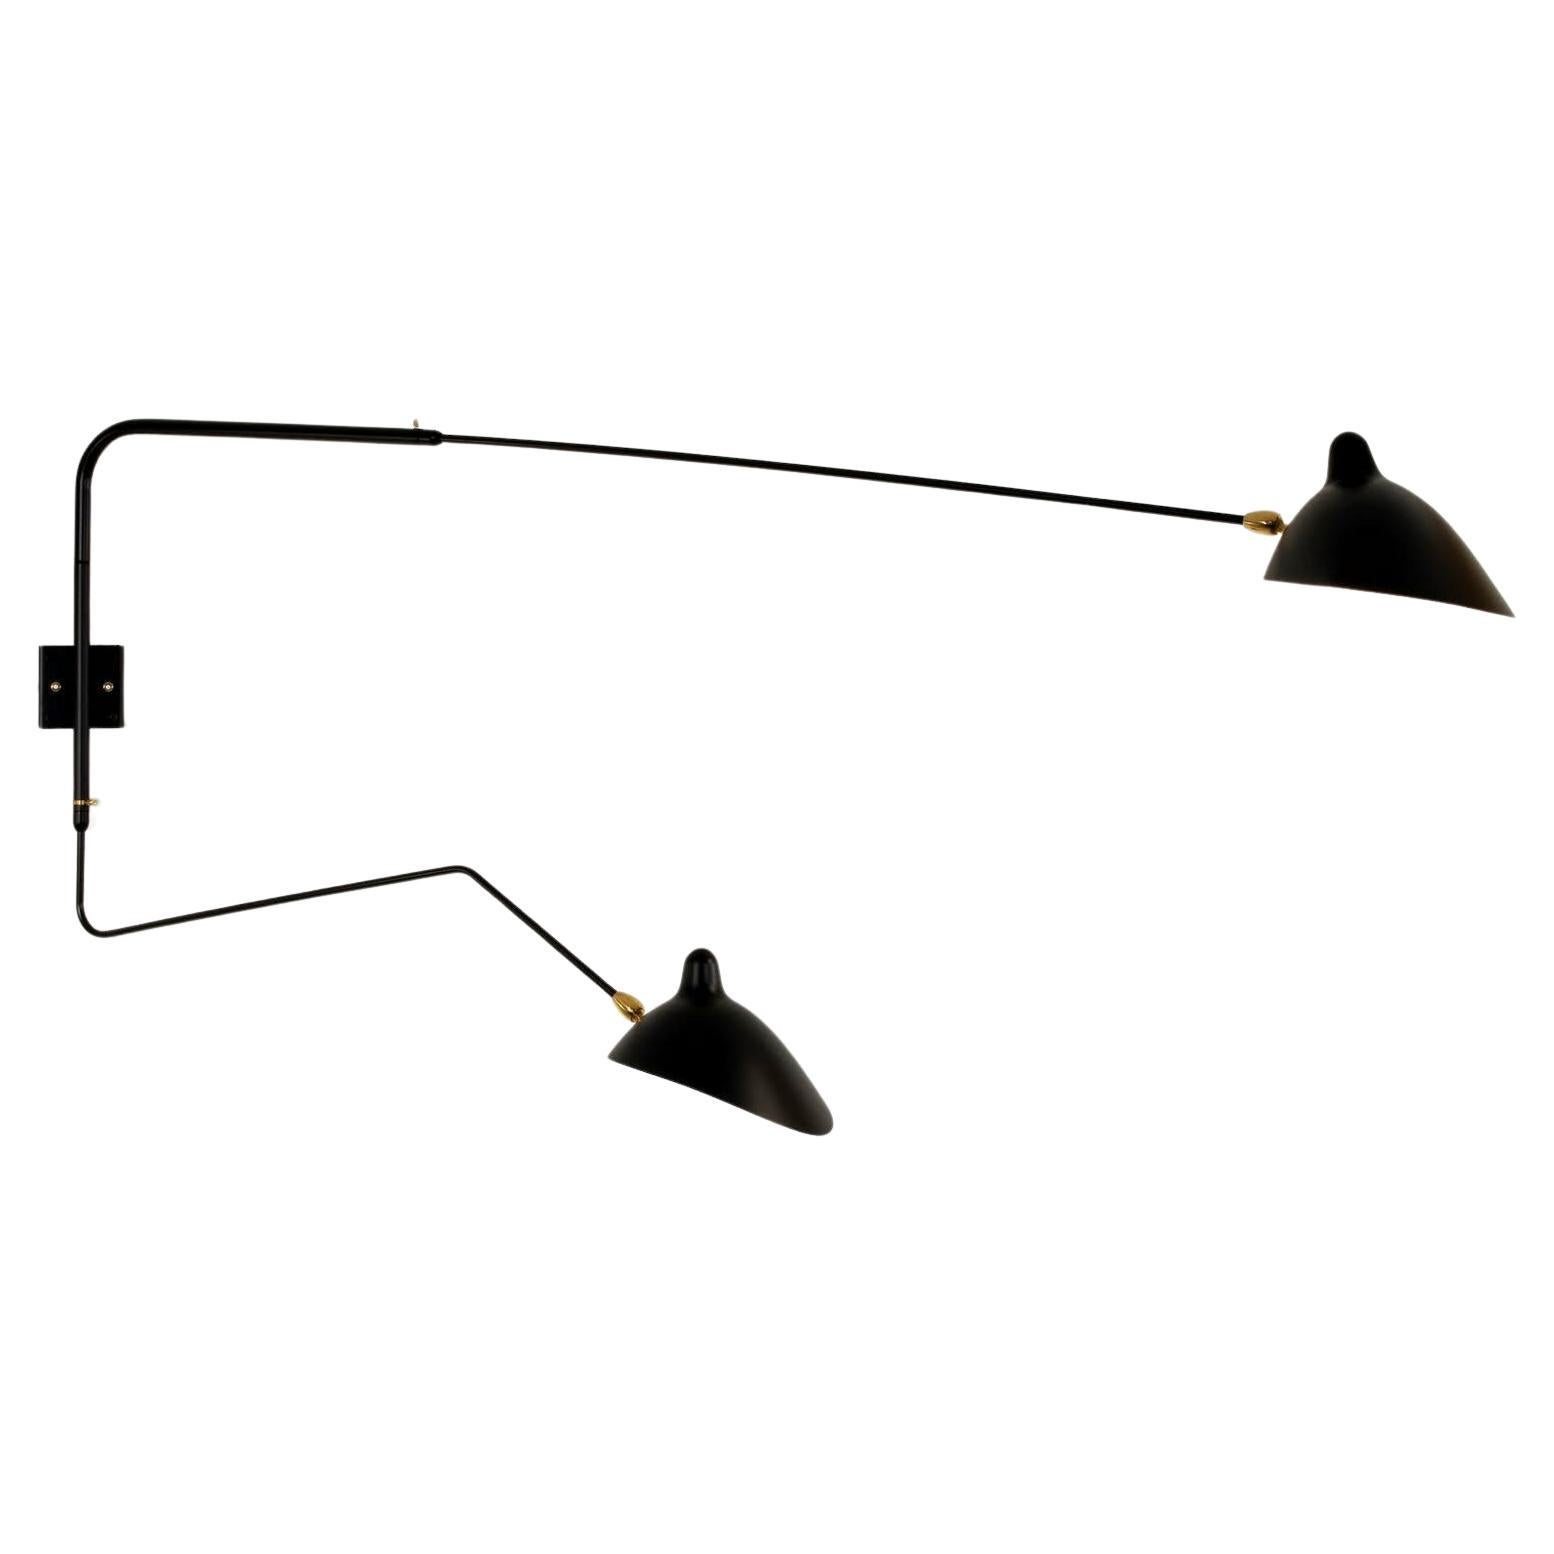 Serge Mouille - Rotating Sconce with 2 Arms (1 Curved) in Black - IN STOCK! For Sale